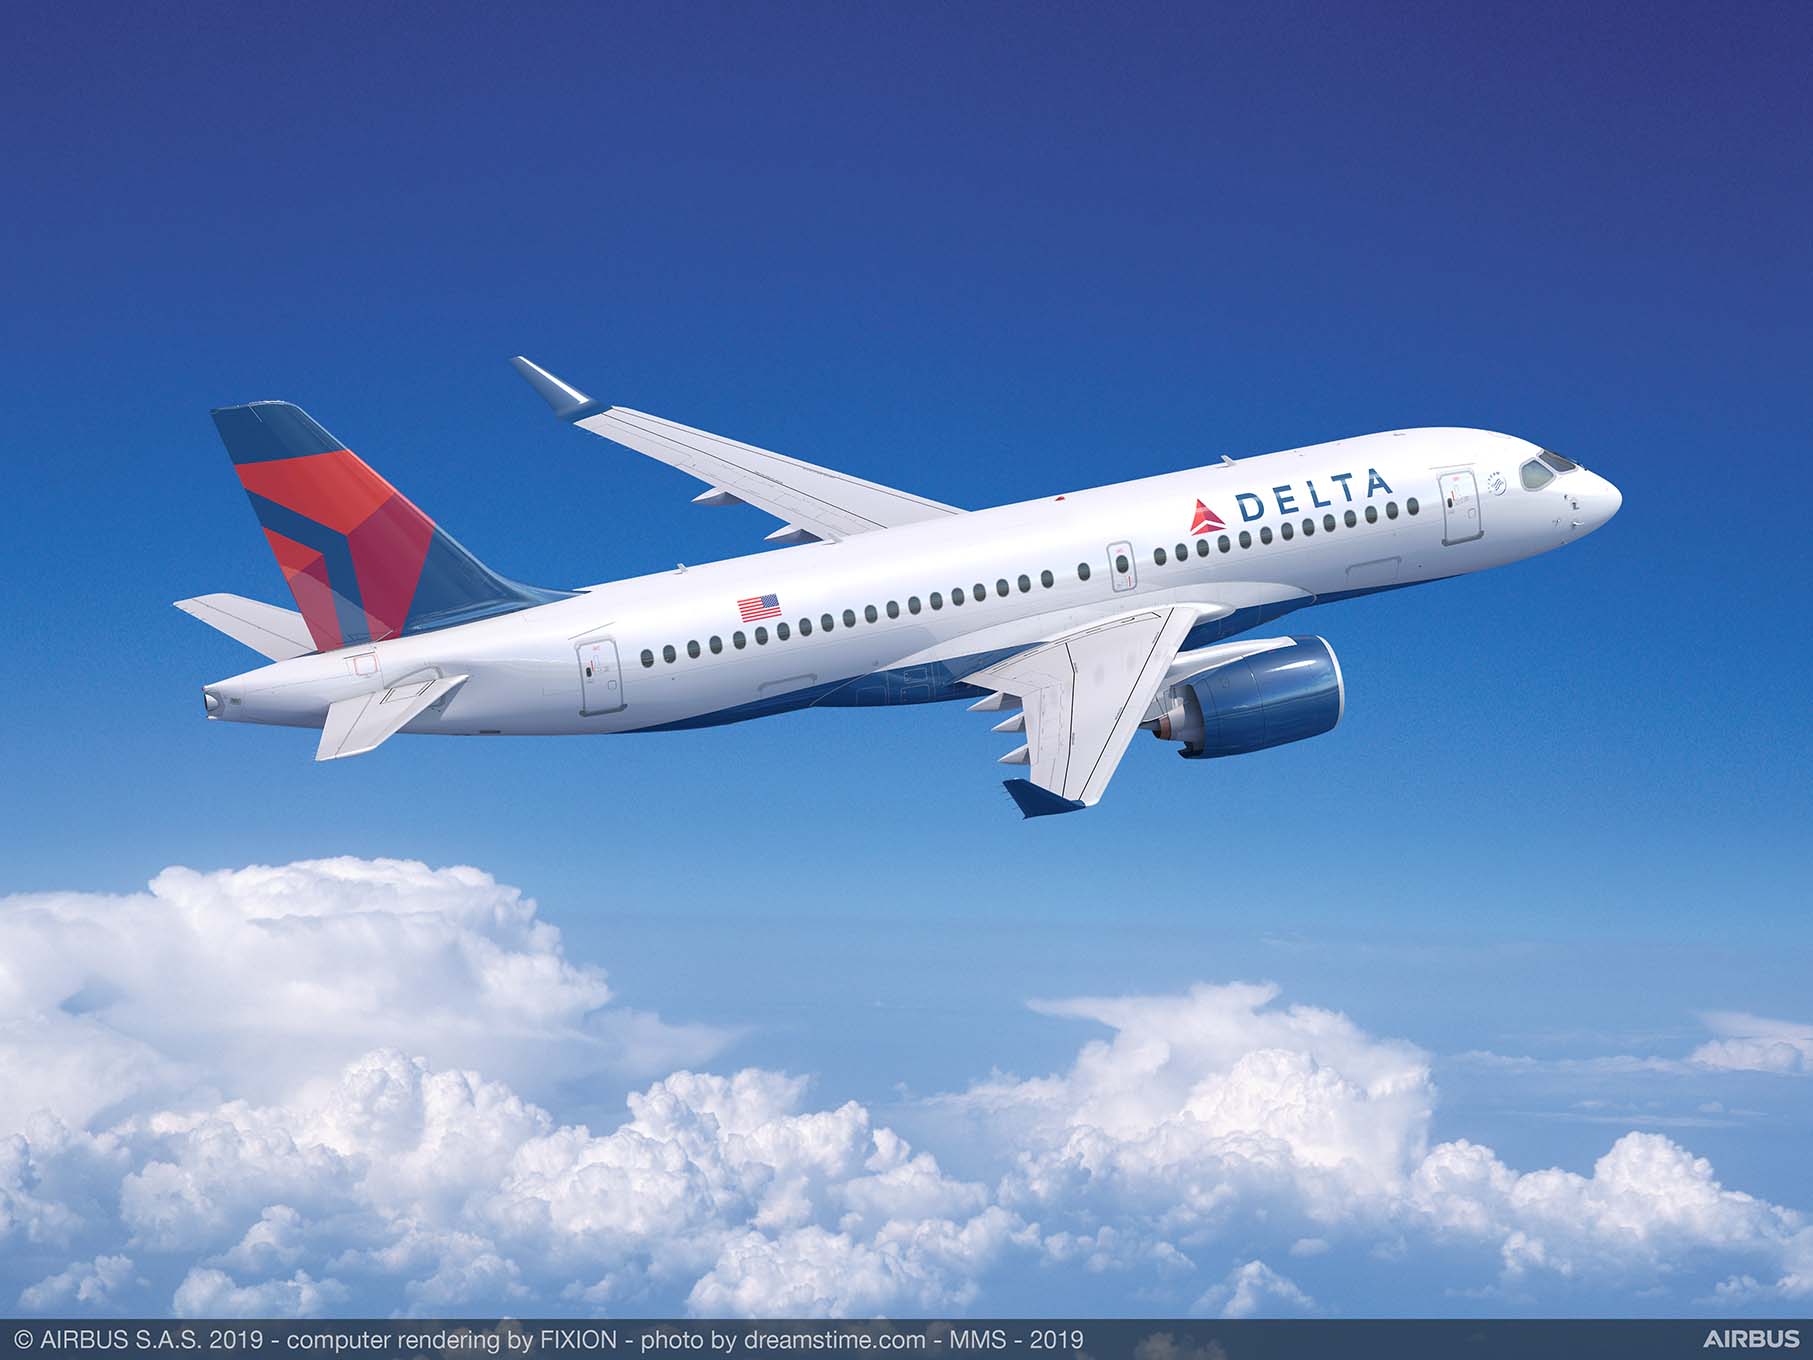 Delta and Aeromexico set to continue partnership in 2020